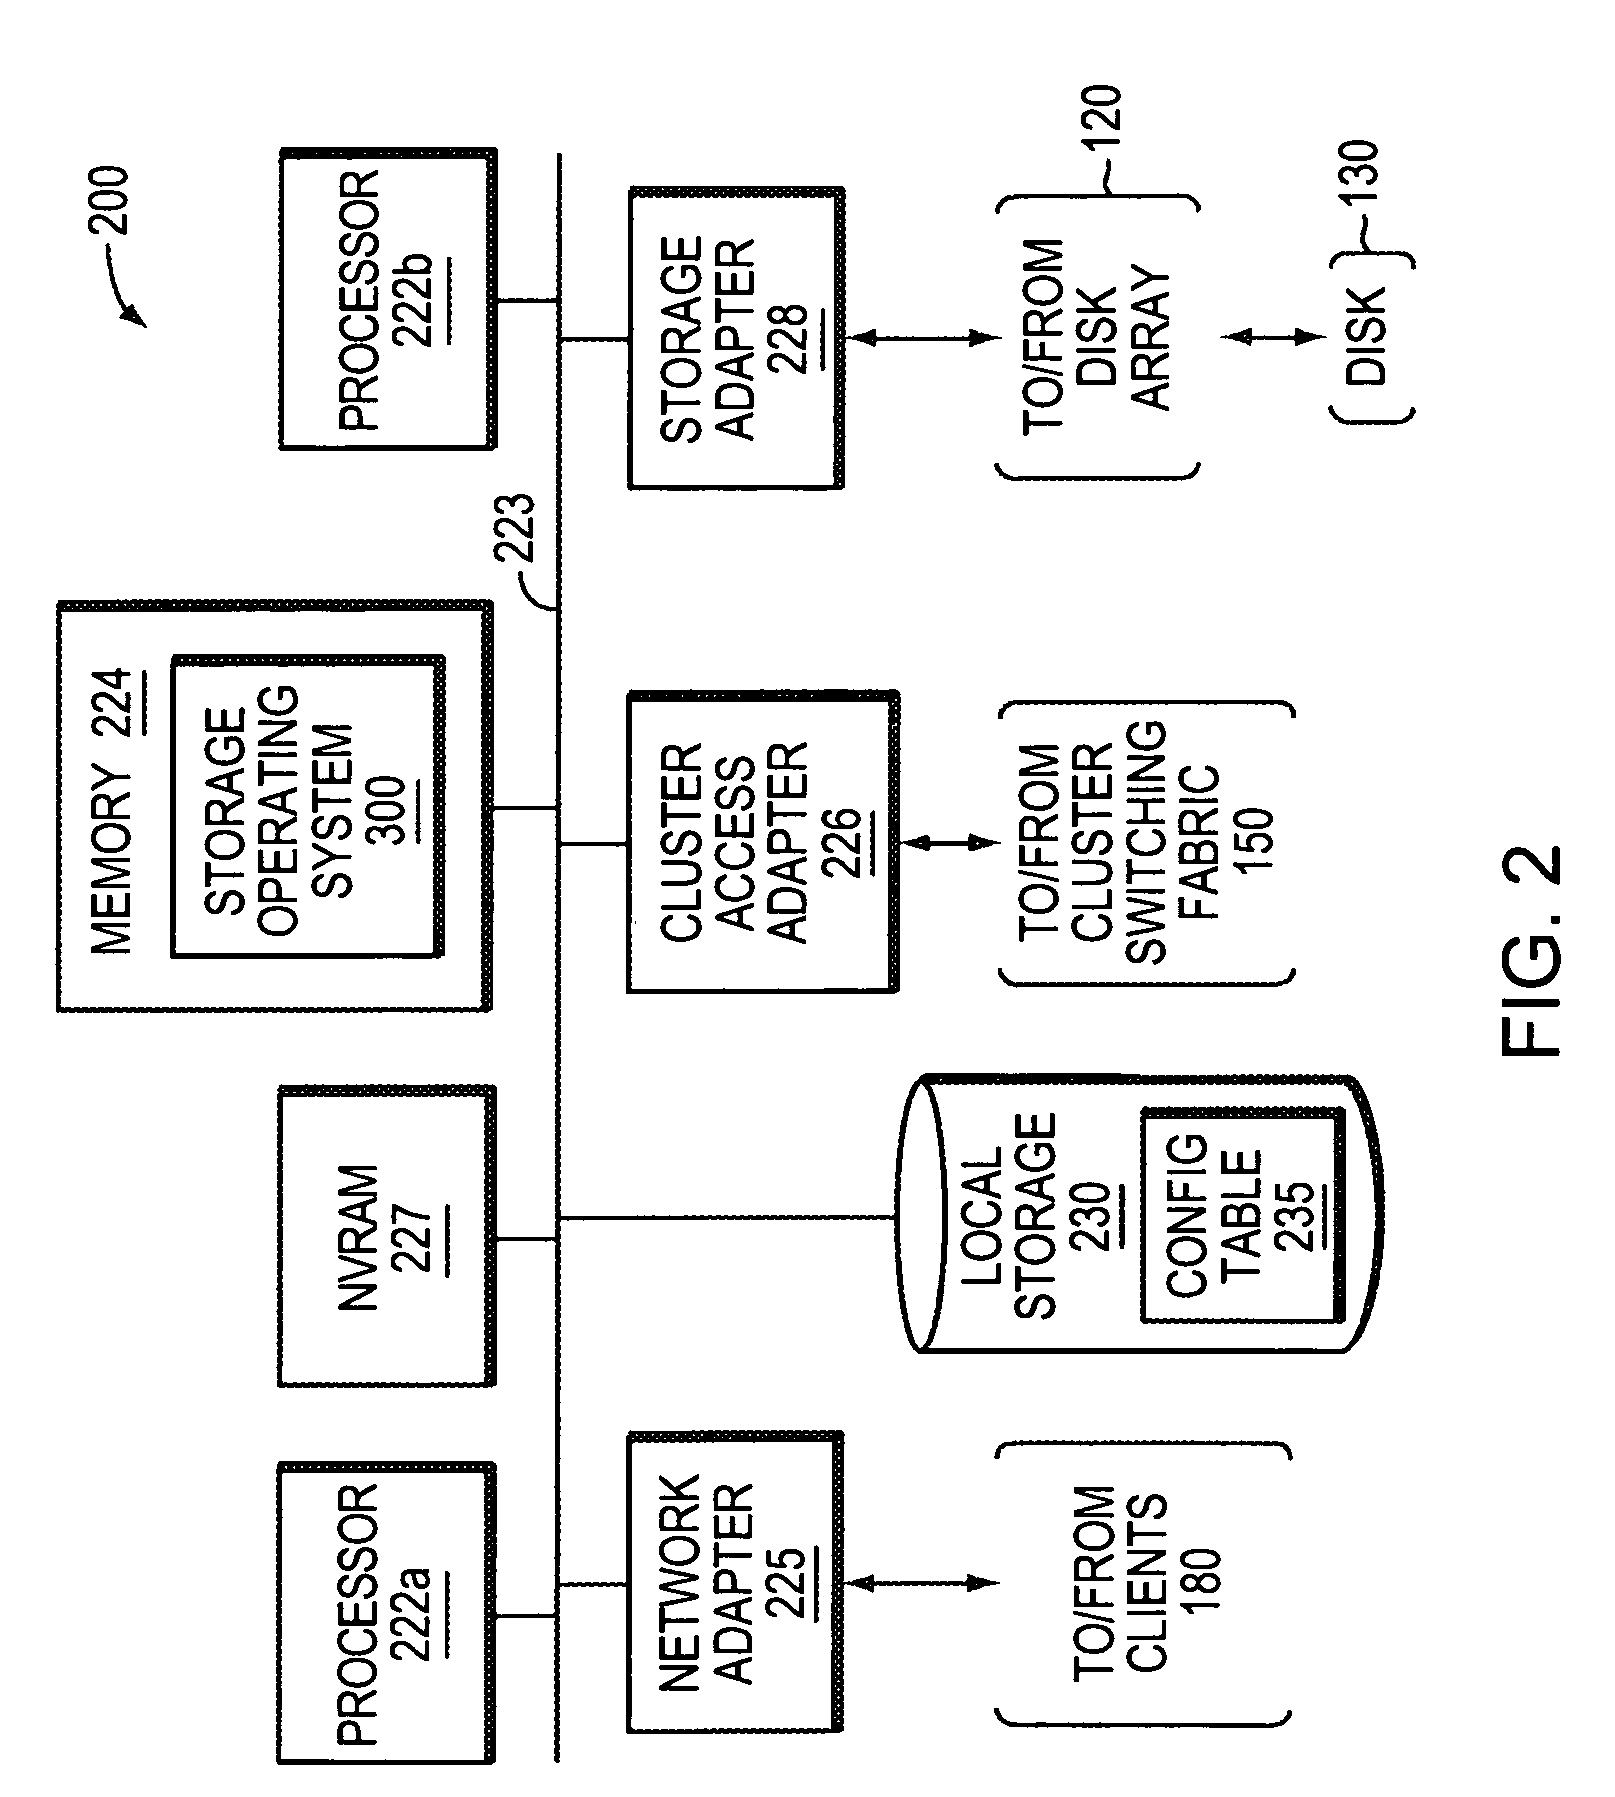 System and method for storage takeover